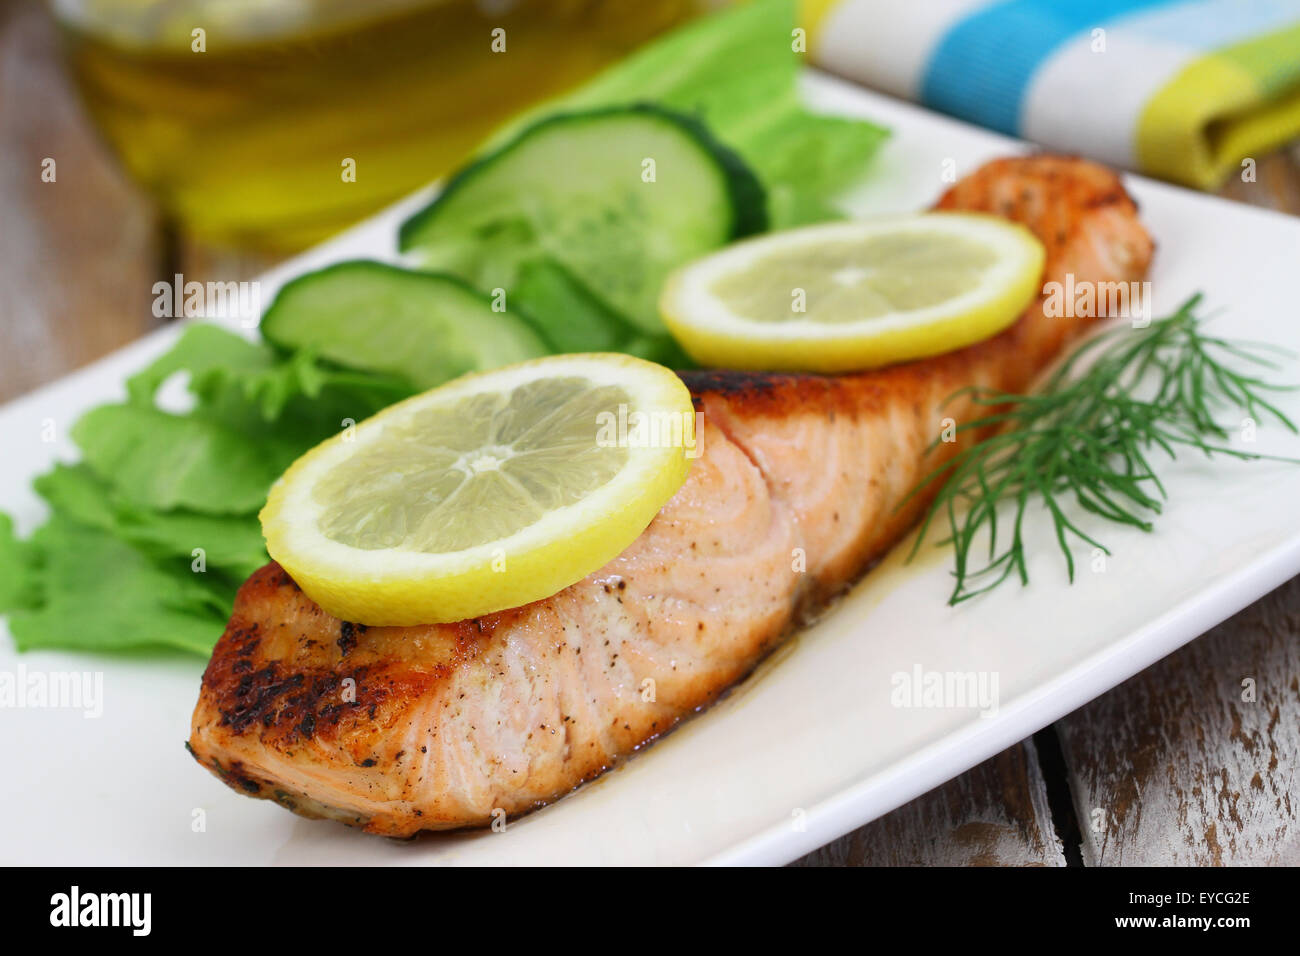 Grilled salmon with lemon and green salad Stock Photo